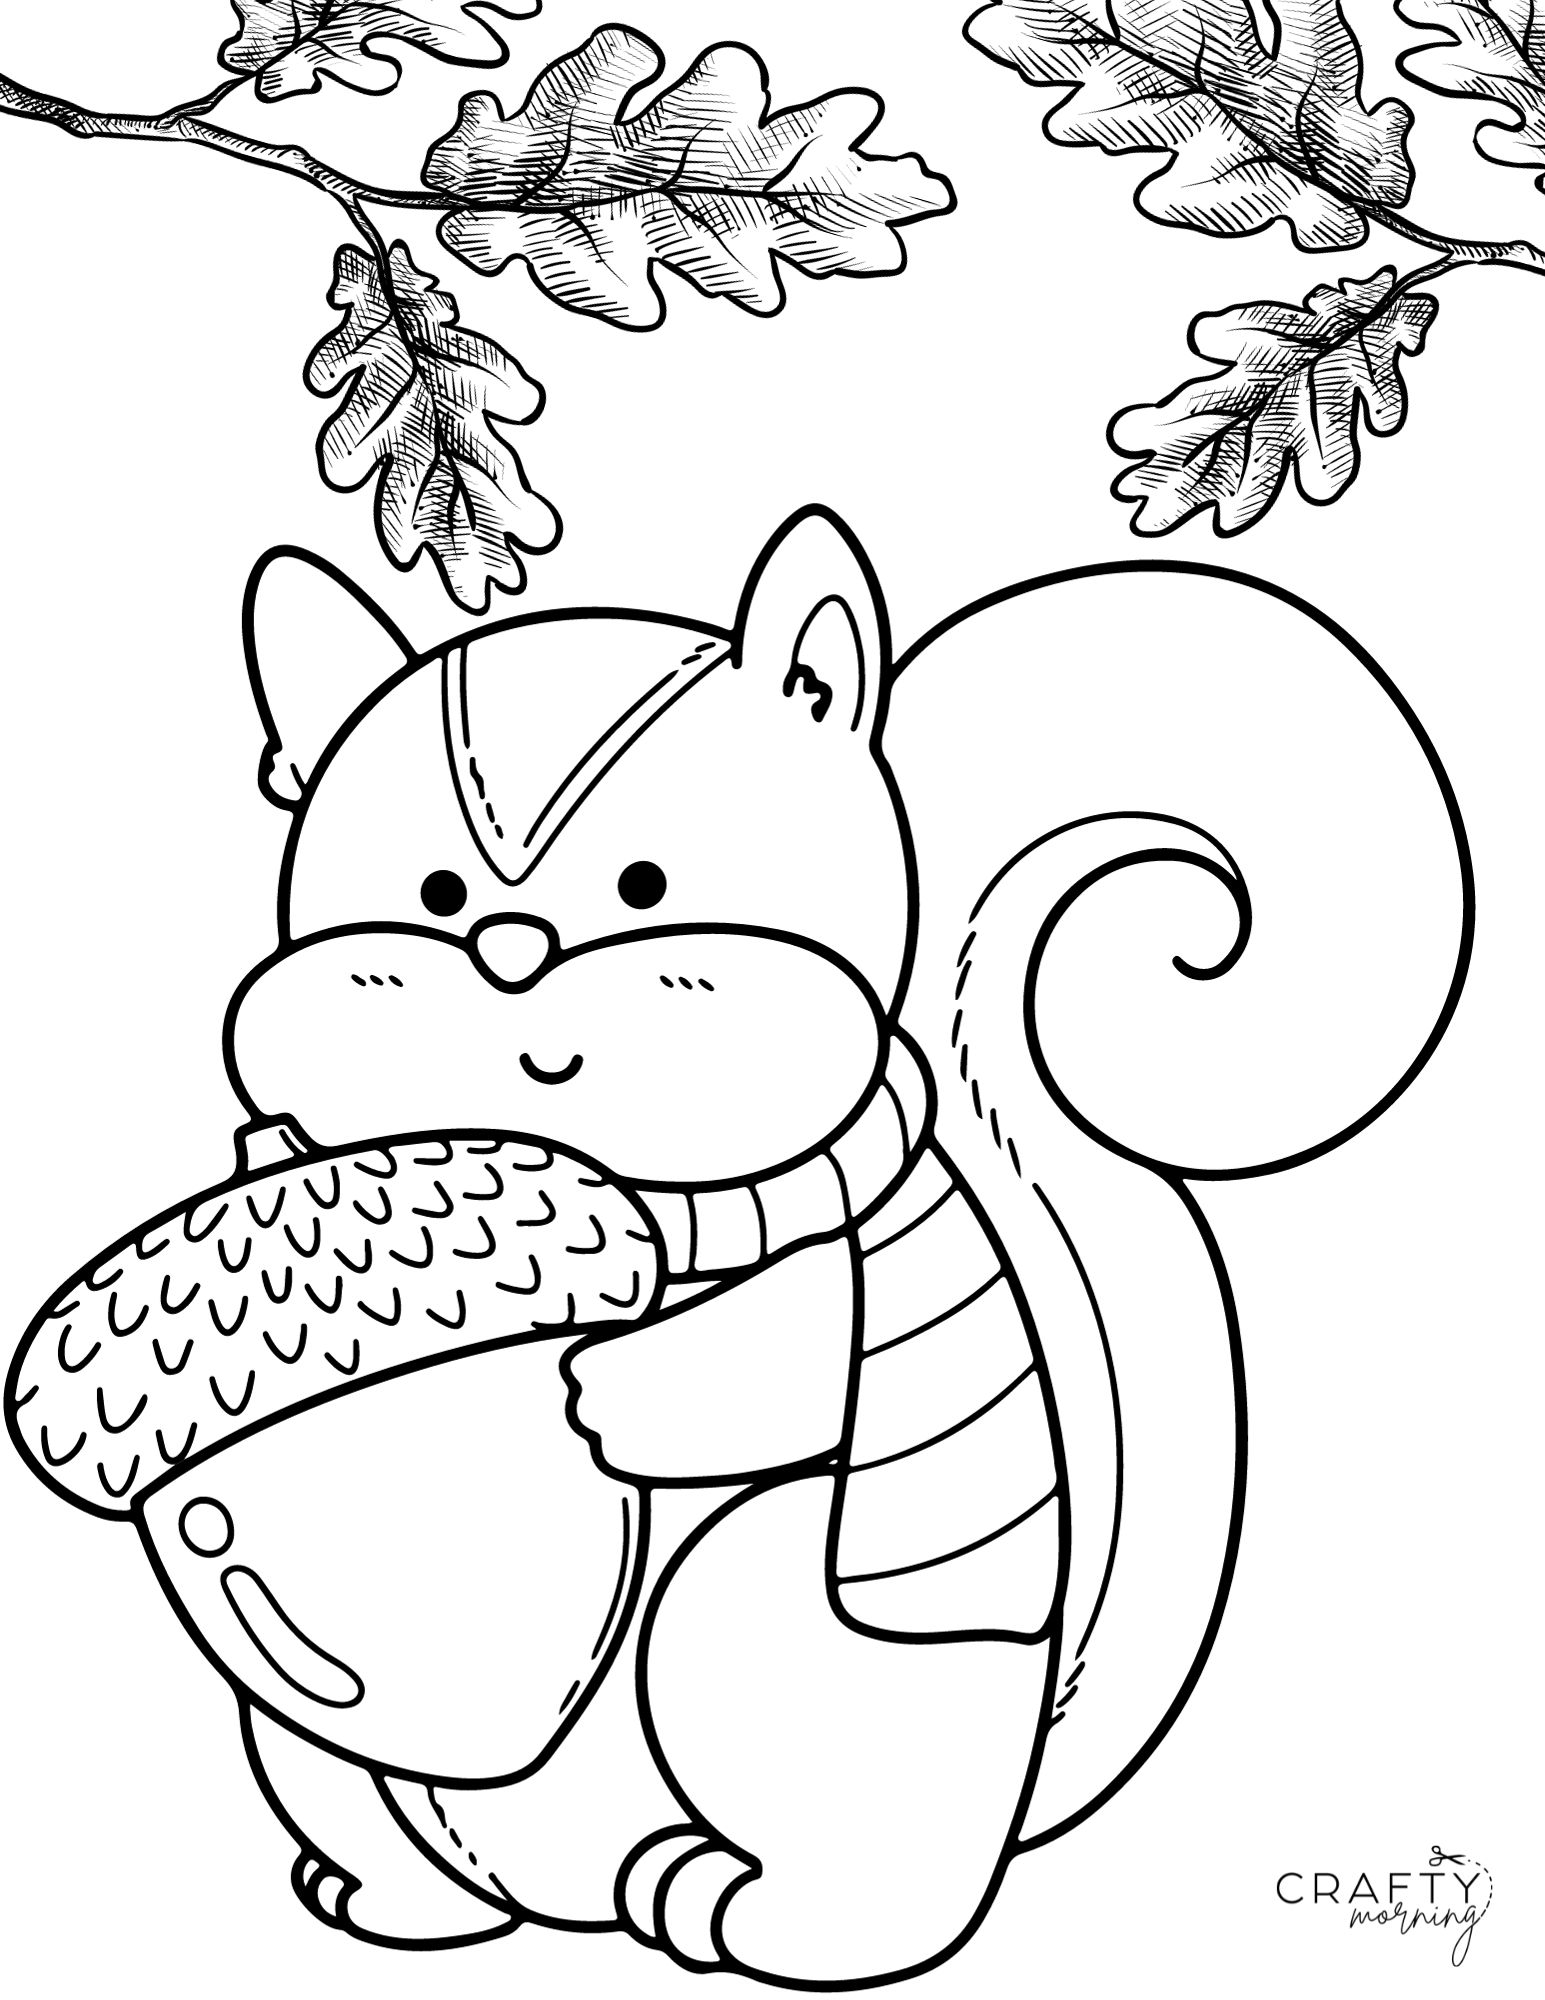 Squirrel coloring pages to print